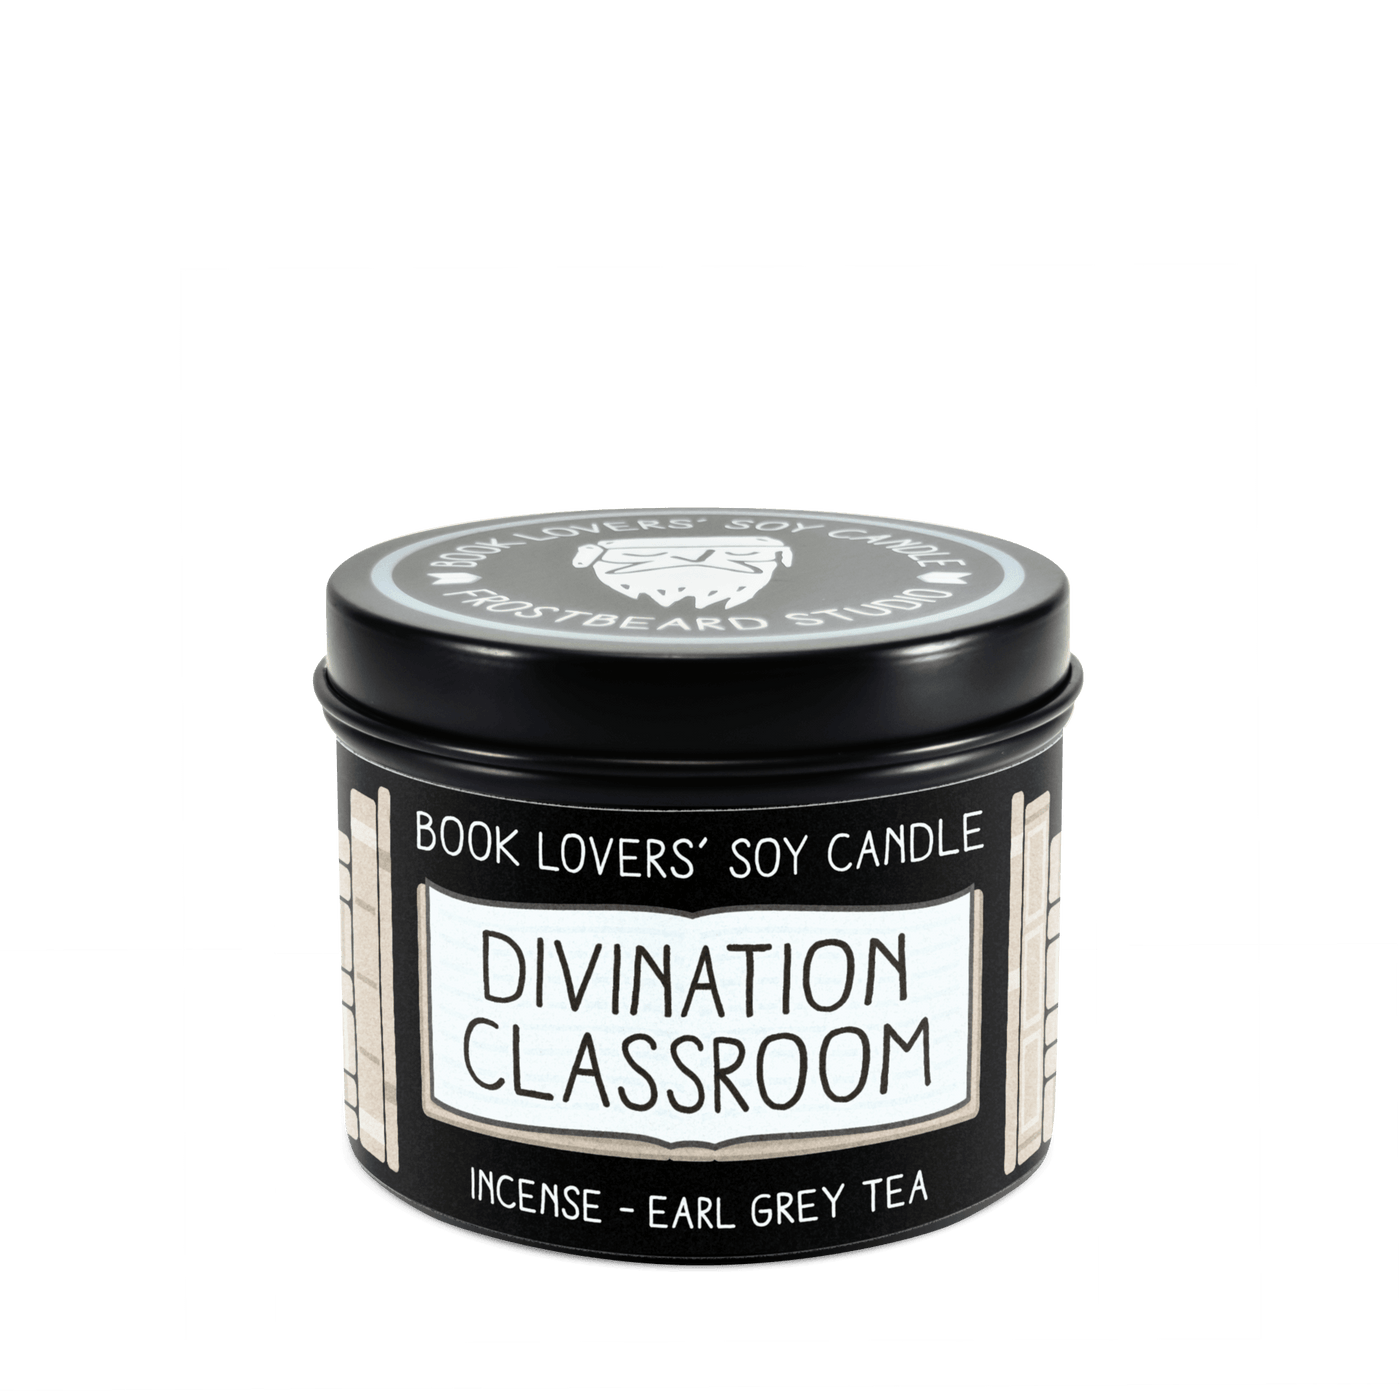 Divination Classroom - 4 oz Tin - Book Lovers' Soy Candle - Frostbeard Studio